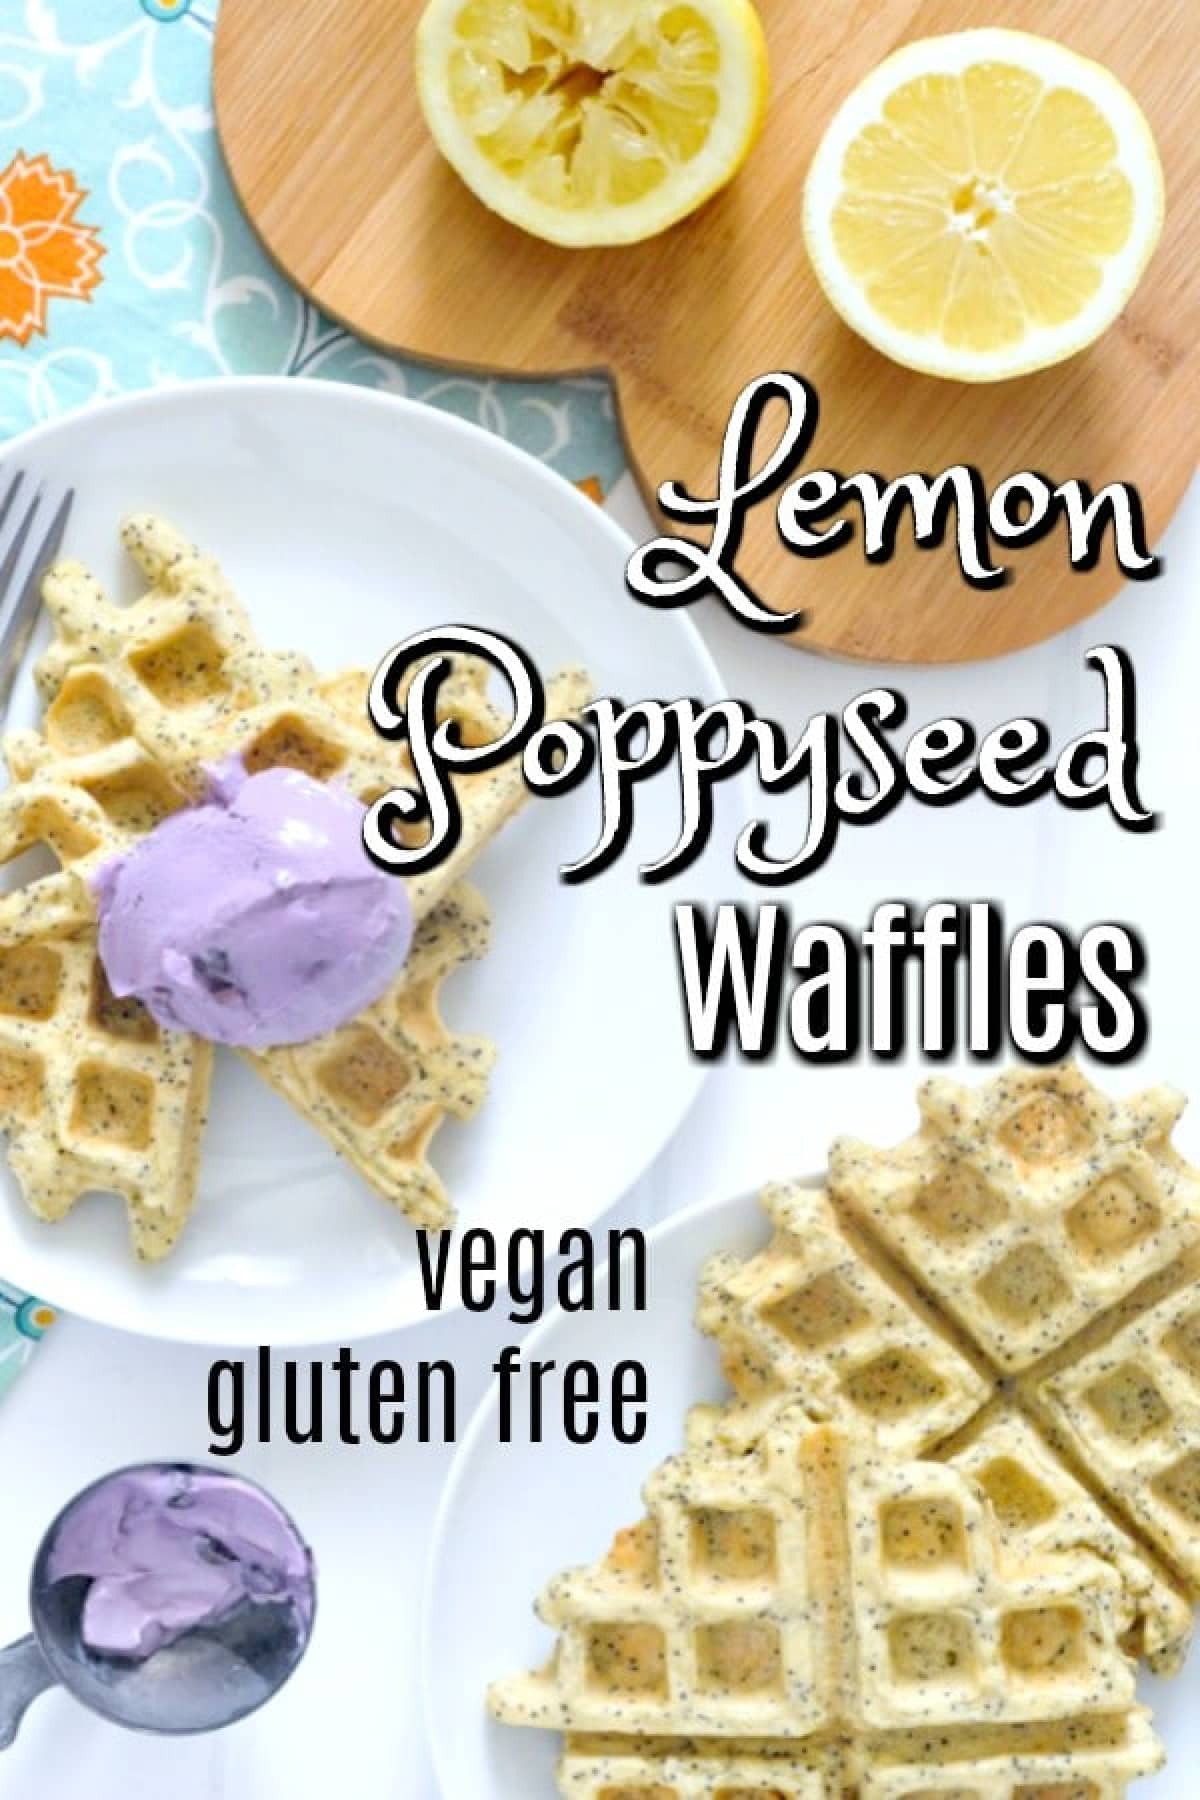 Overhead view of golden yellow lemon poppyseed waffles on a white plate topped with a scoop of light purple blueberry yogurt. A heart shaped wood board holds two fresh lemon halves, one squeezed. Another white plate holds 2 more full Belgian style waffles, and an ice cream scoop sits to the side with purple yogurt in it.